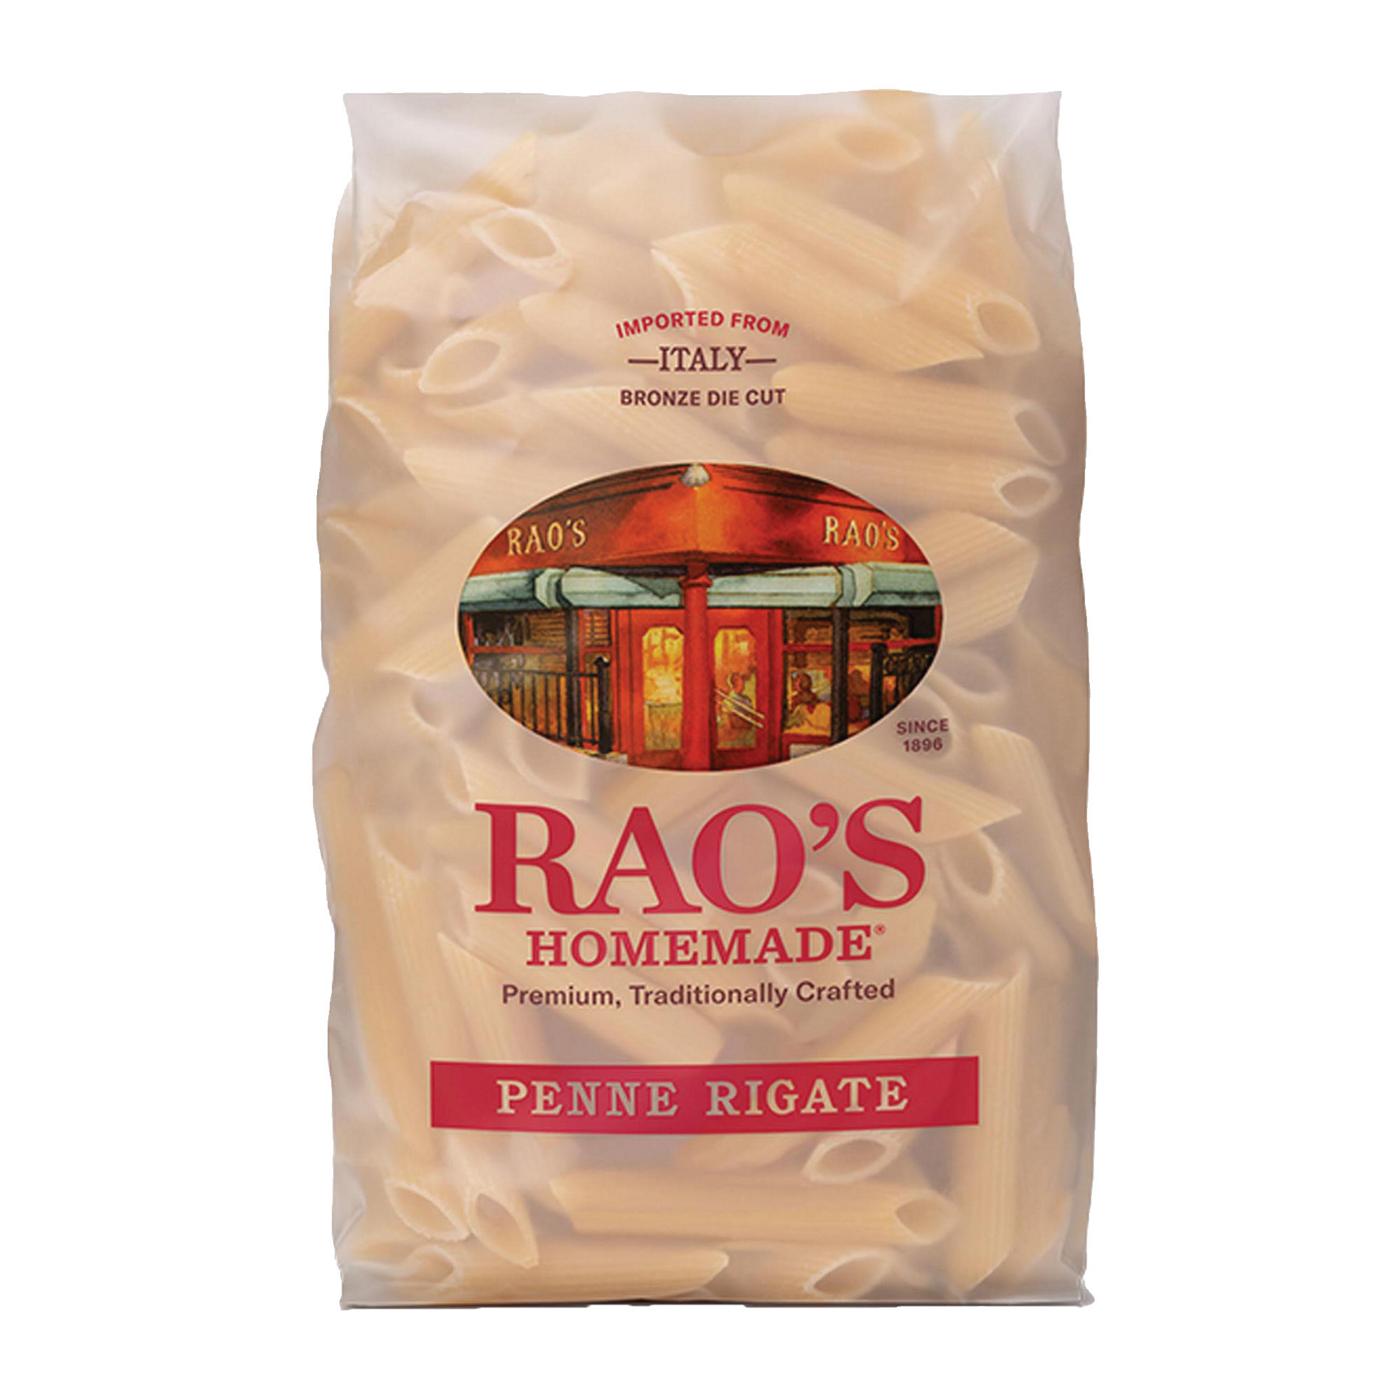 Rao's Homemade Penne Rigate Pasta; image 1 of 4